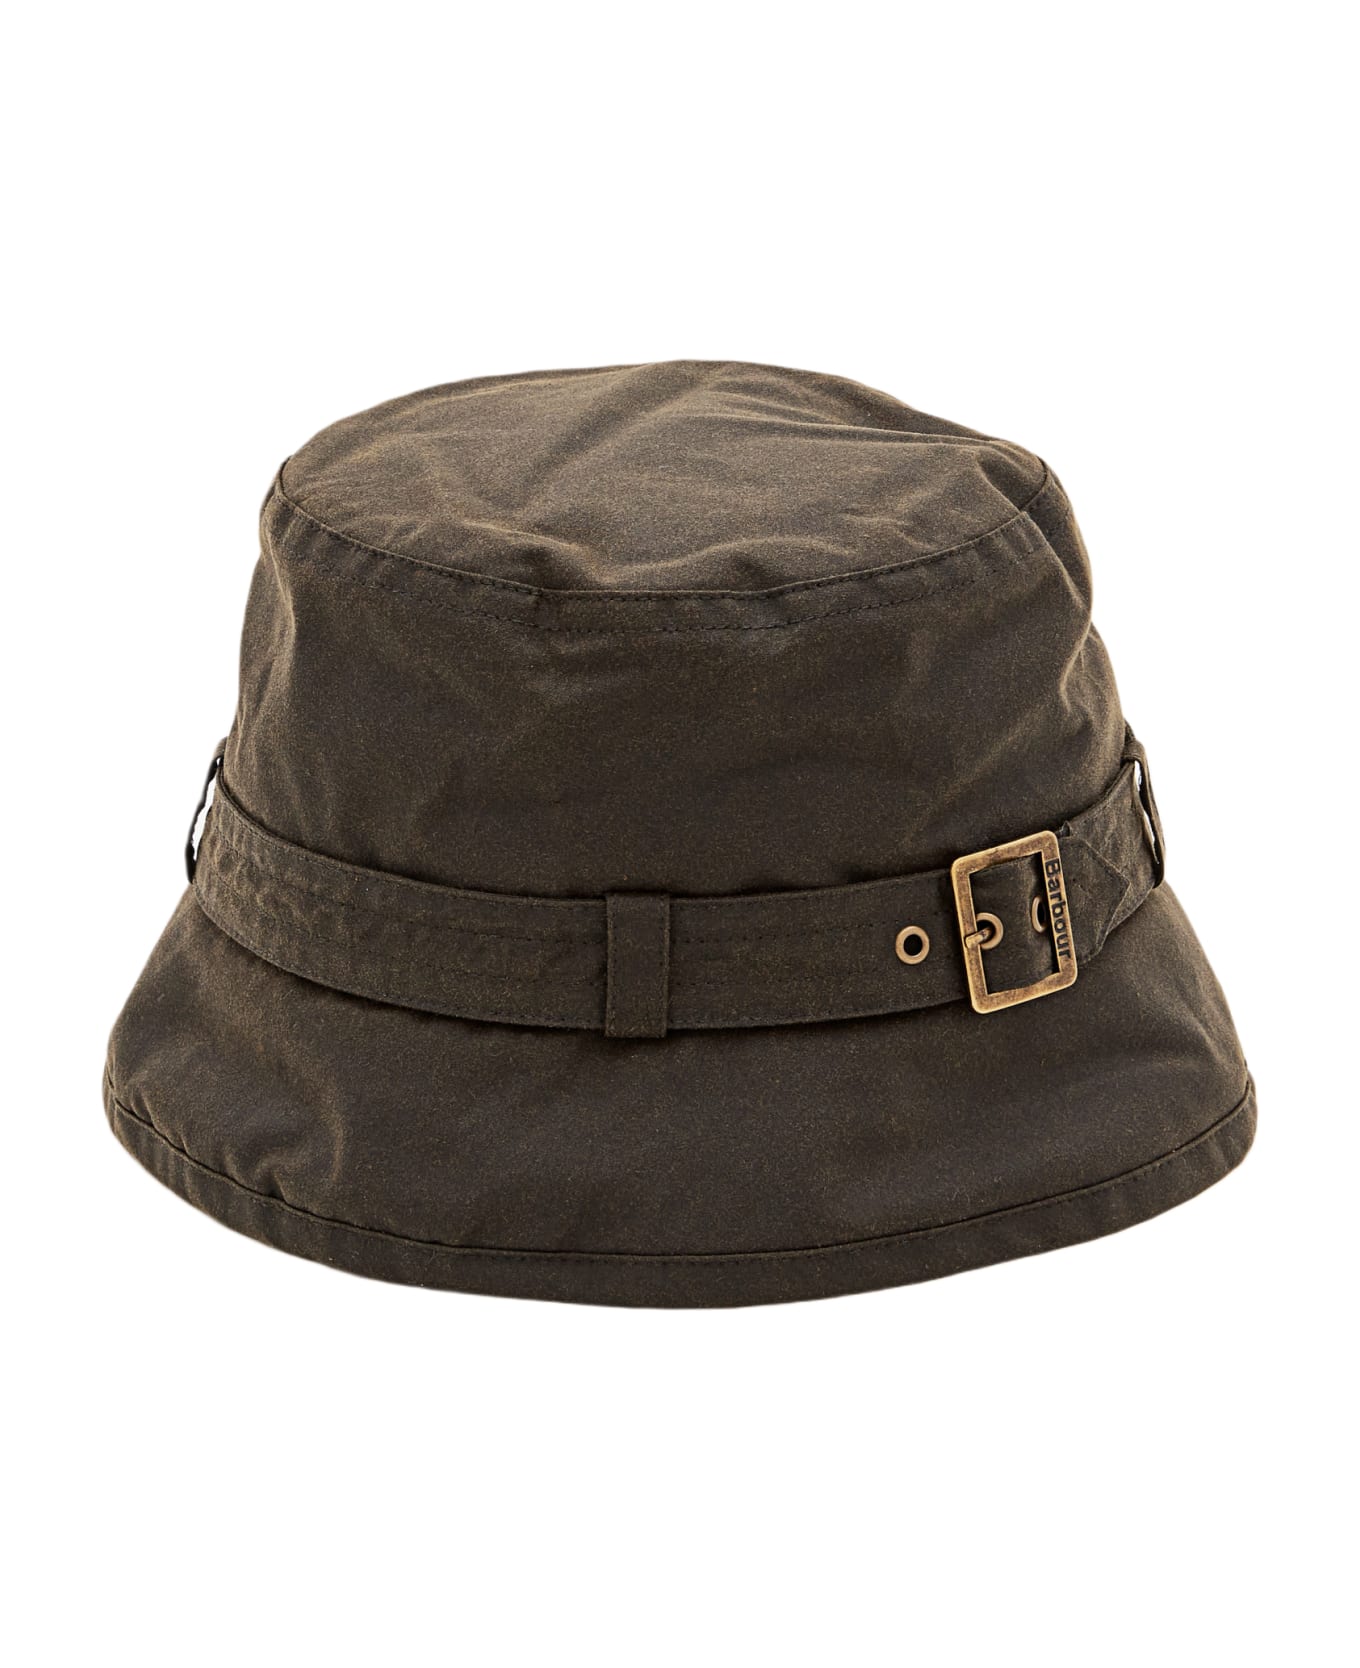 Barbour Kelso Waxed Cotton Belted Bucket Hat - Green